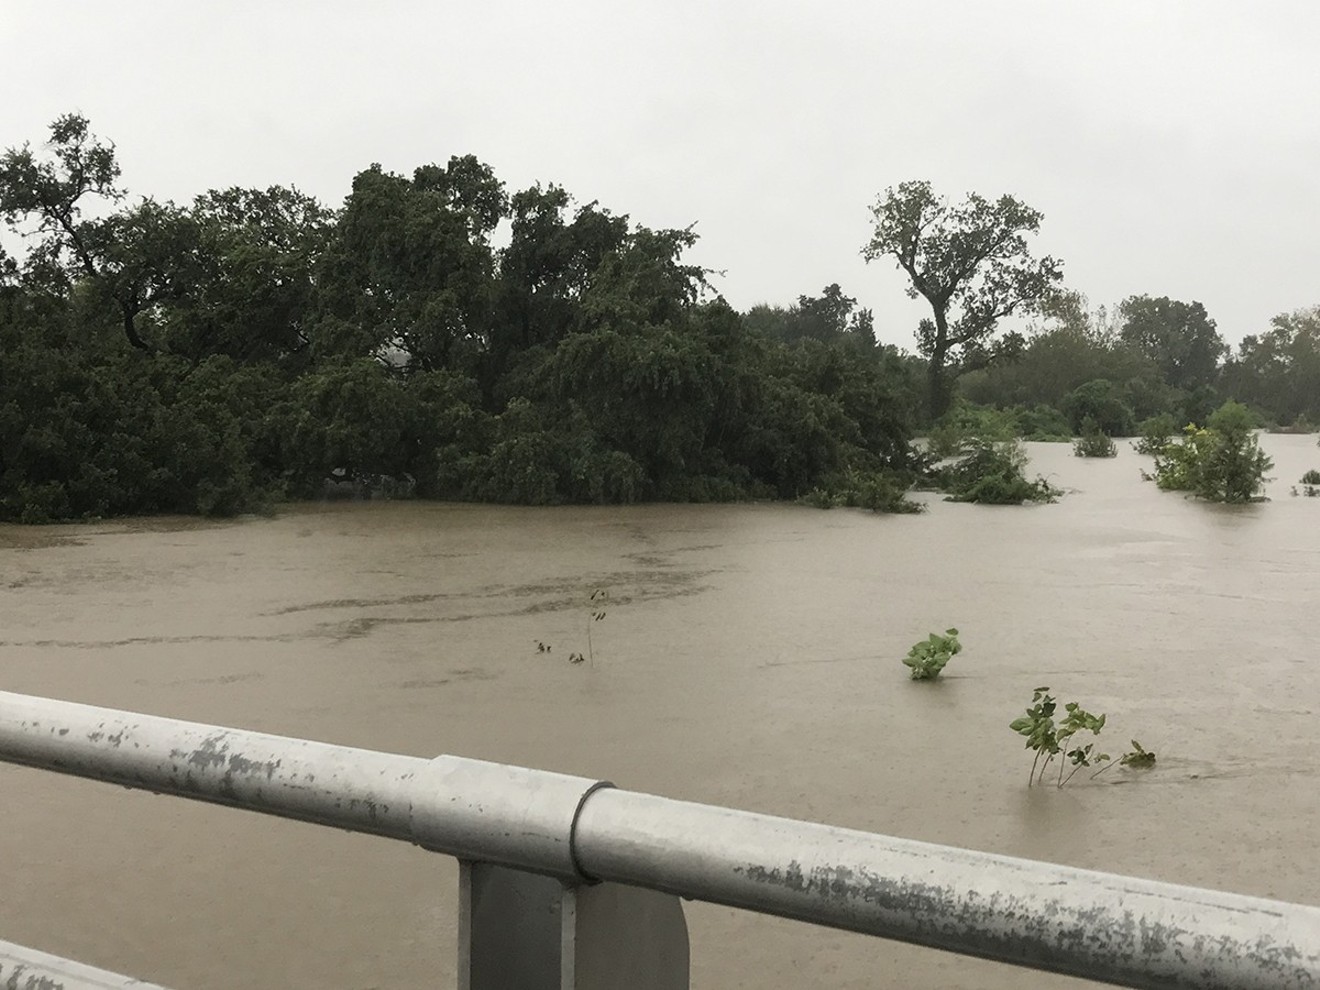 Texas ranchers are dealing with widespread, devastating flooding.